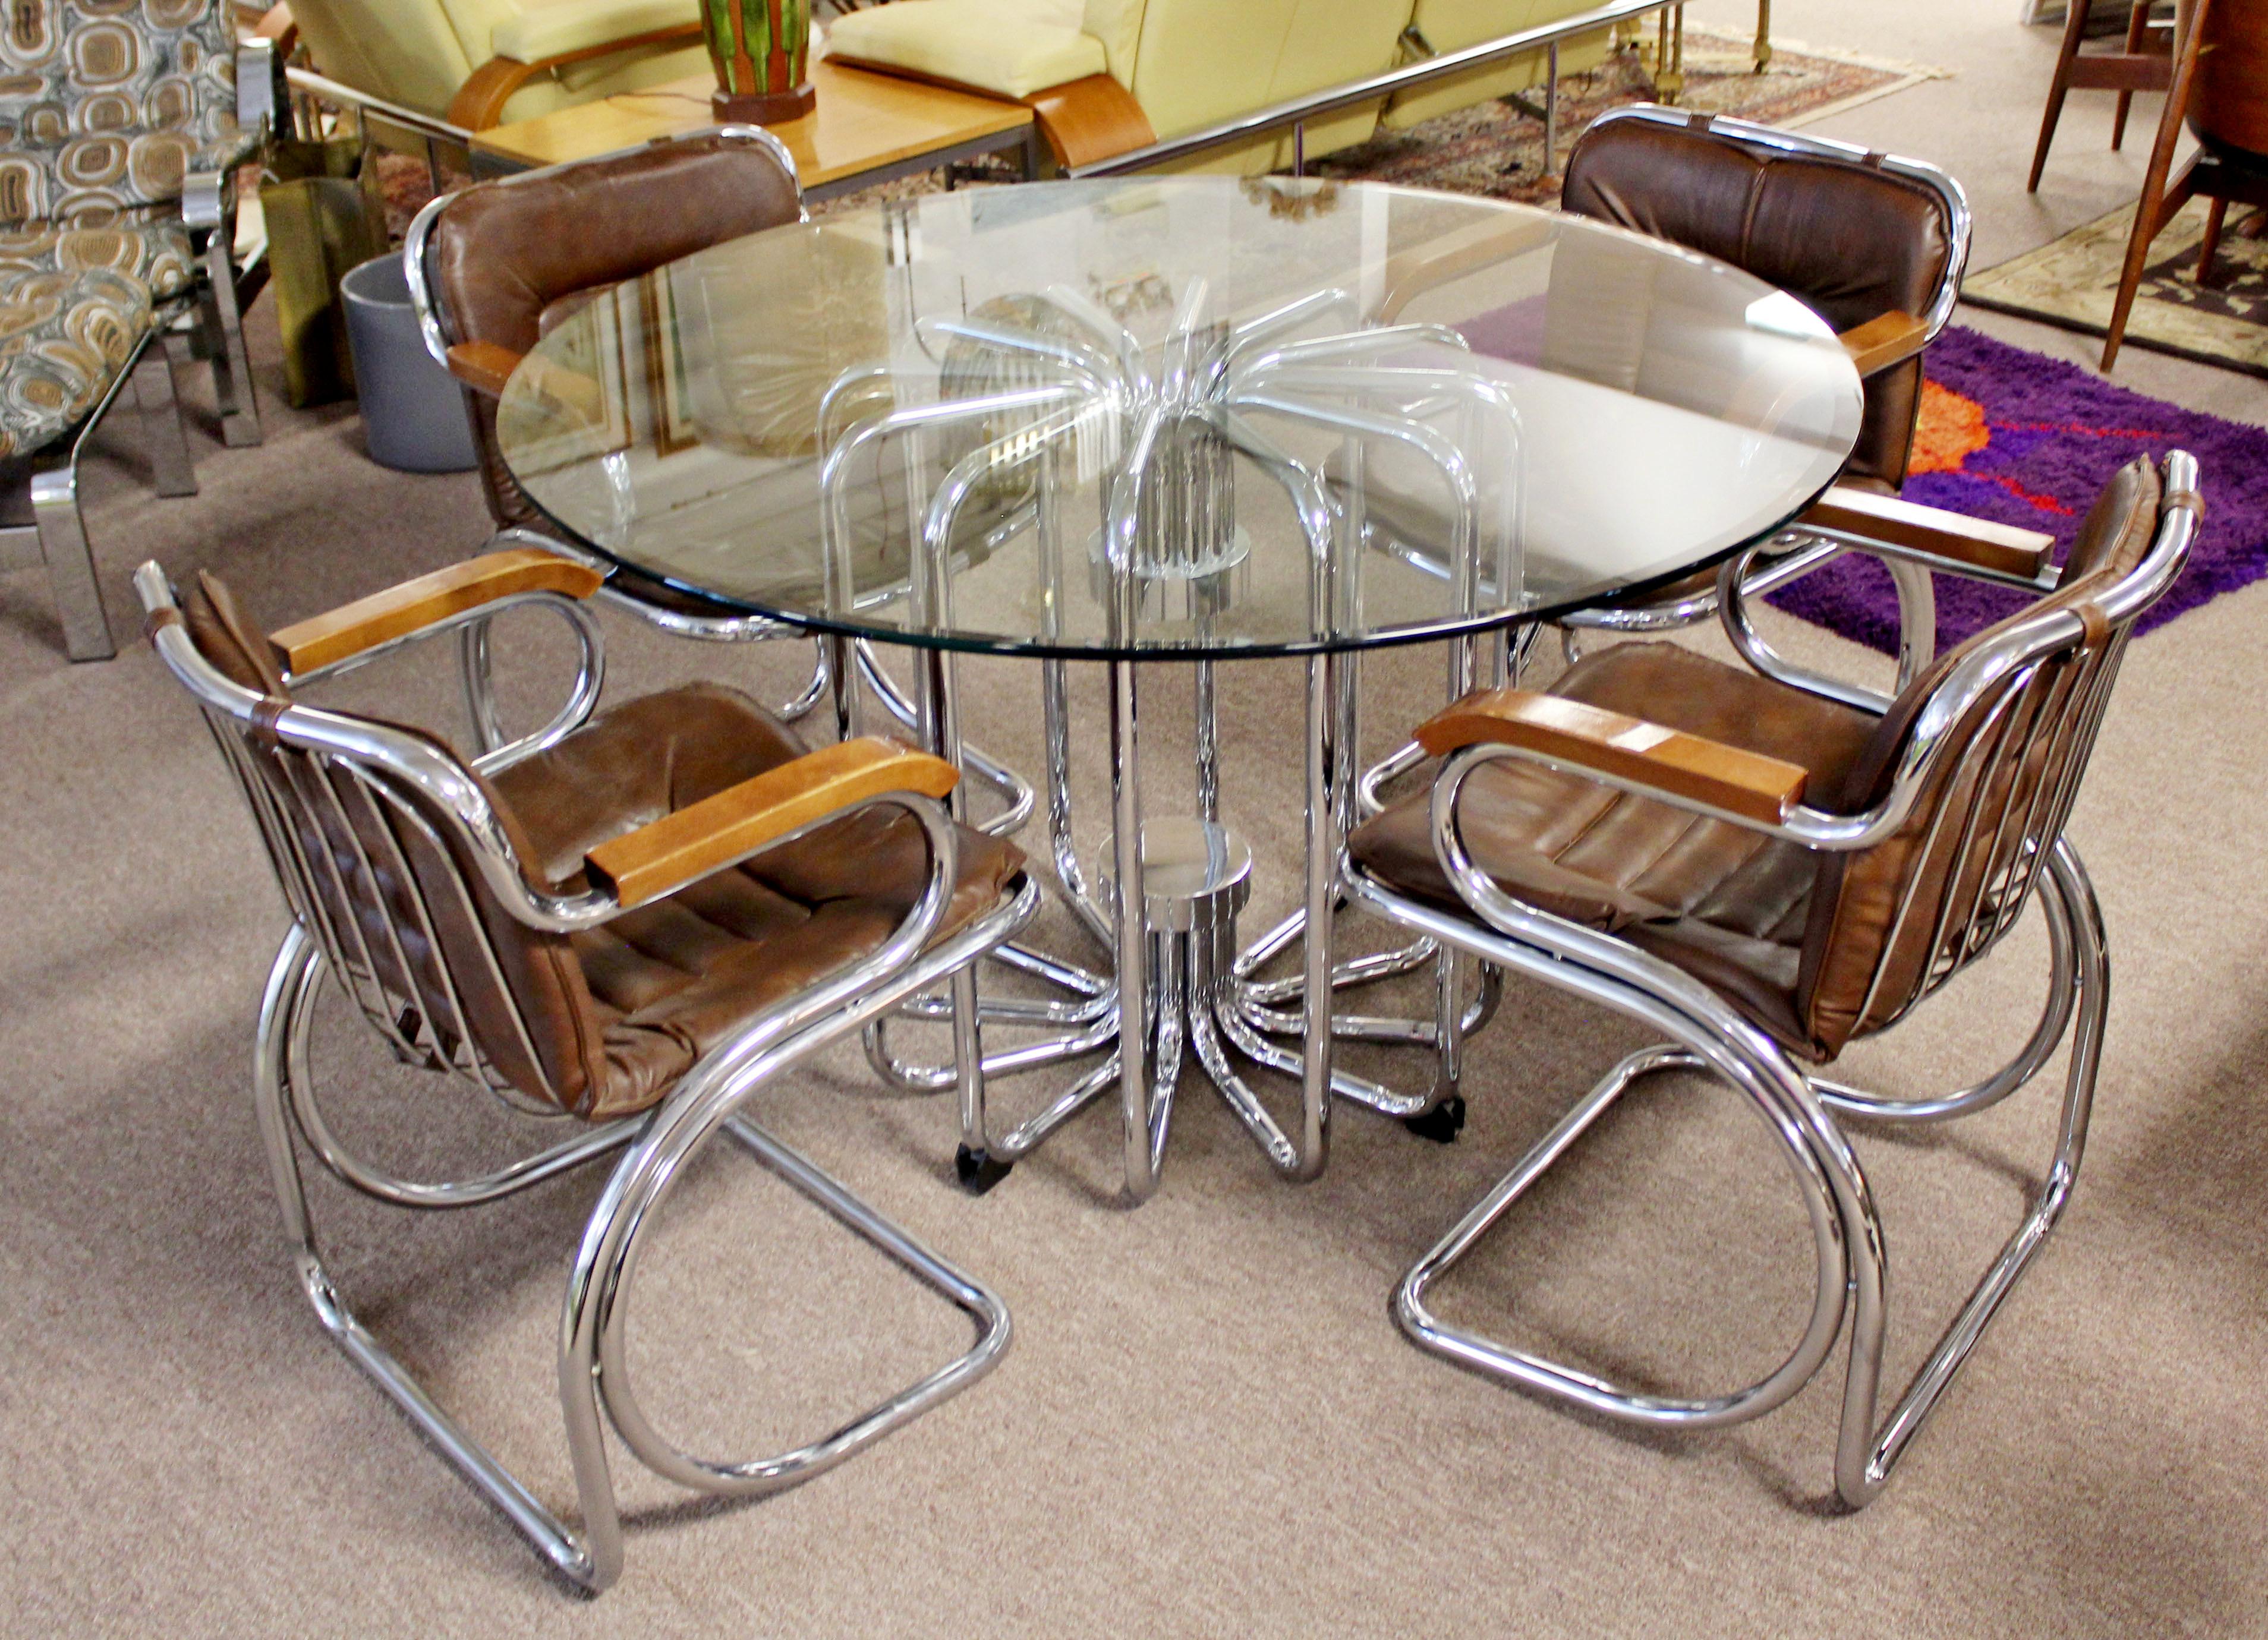 For your consideration is an Italian round dinette table with a unique tubular chrome base and a set of four brown leather chairs with chrome bases by Gastone Rinaldi, circa 1970s. In excellent condition with a few minor imperfections on the